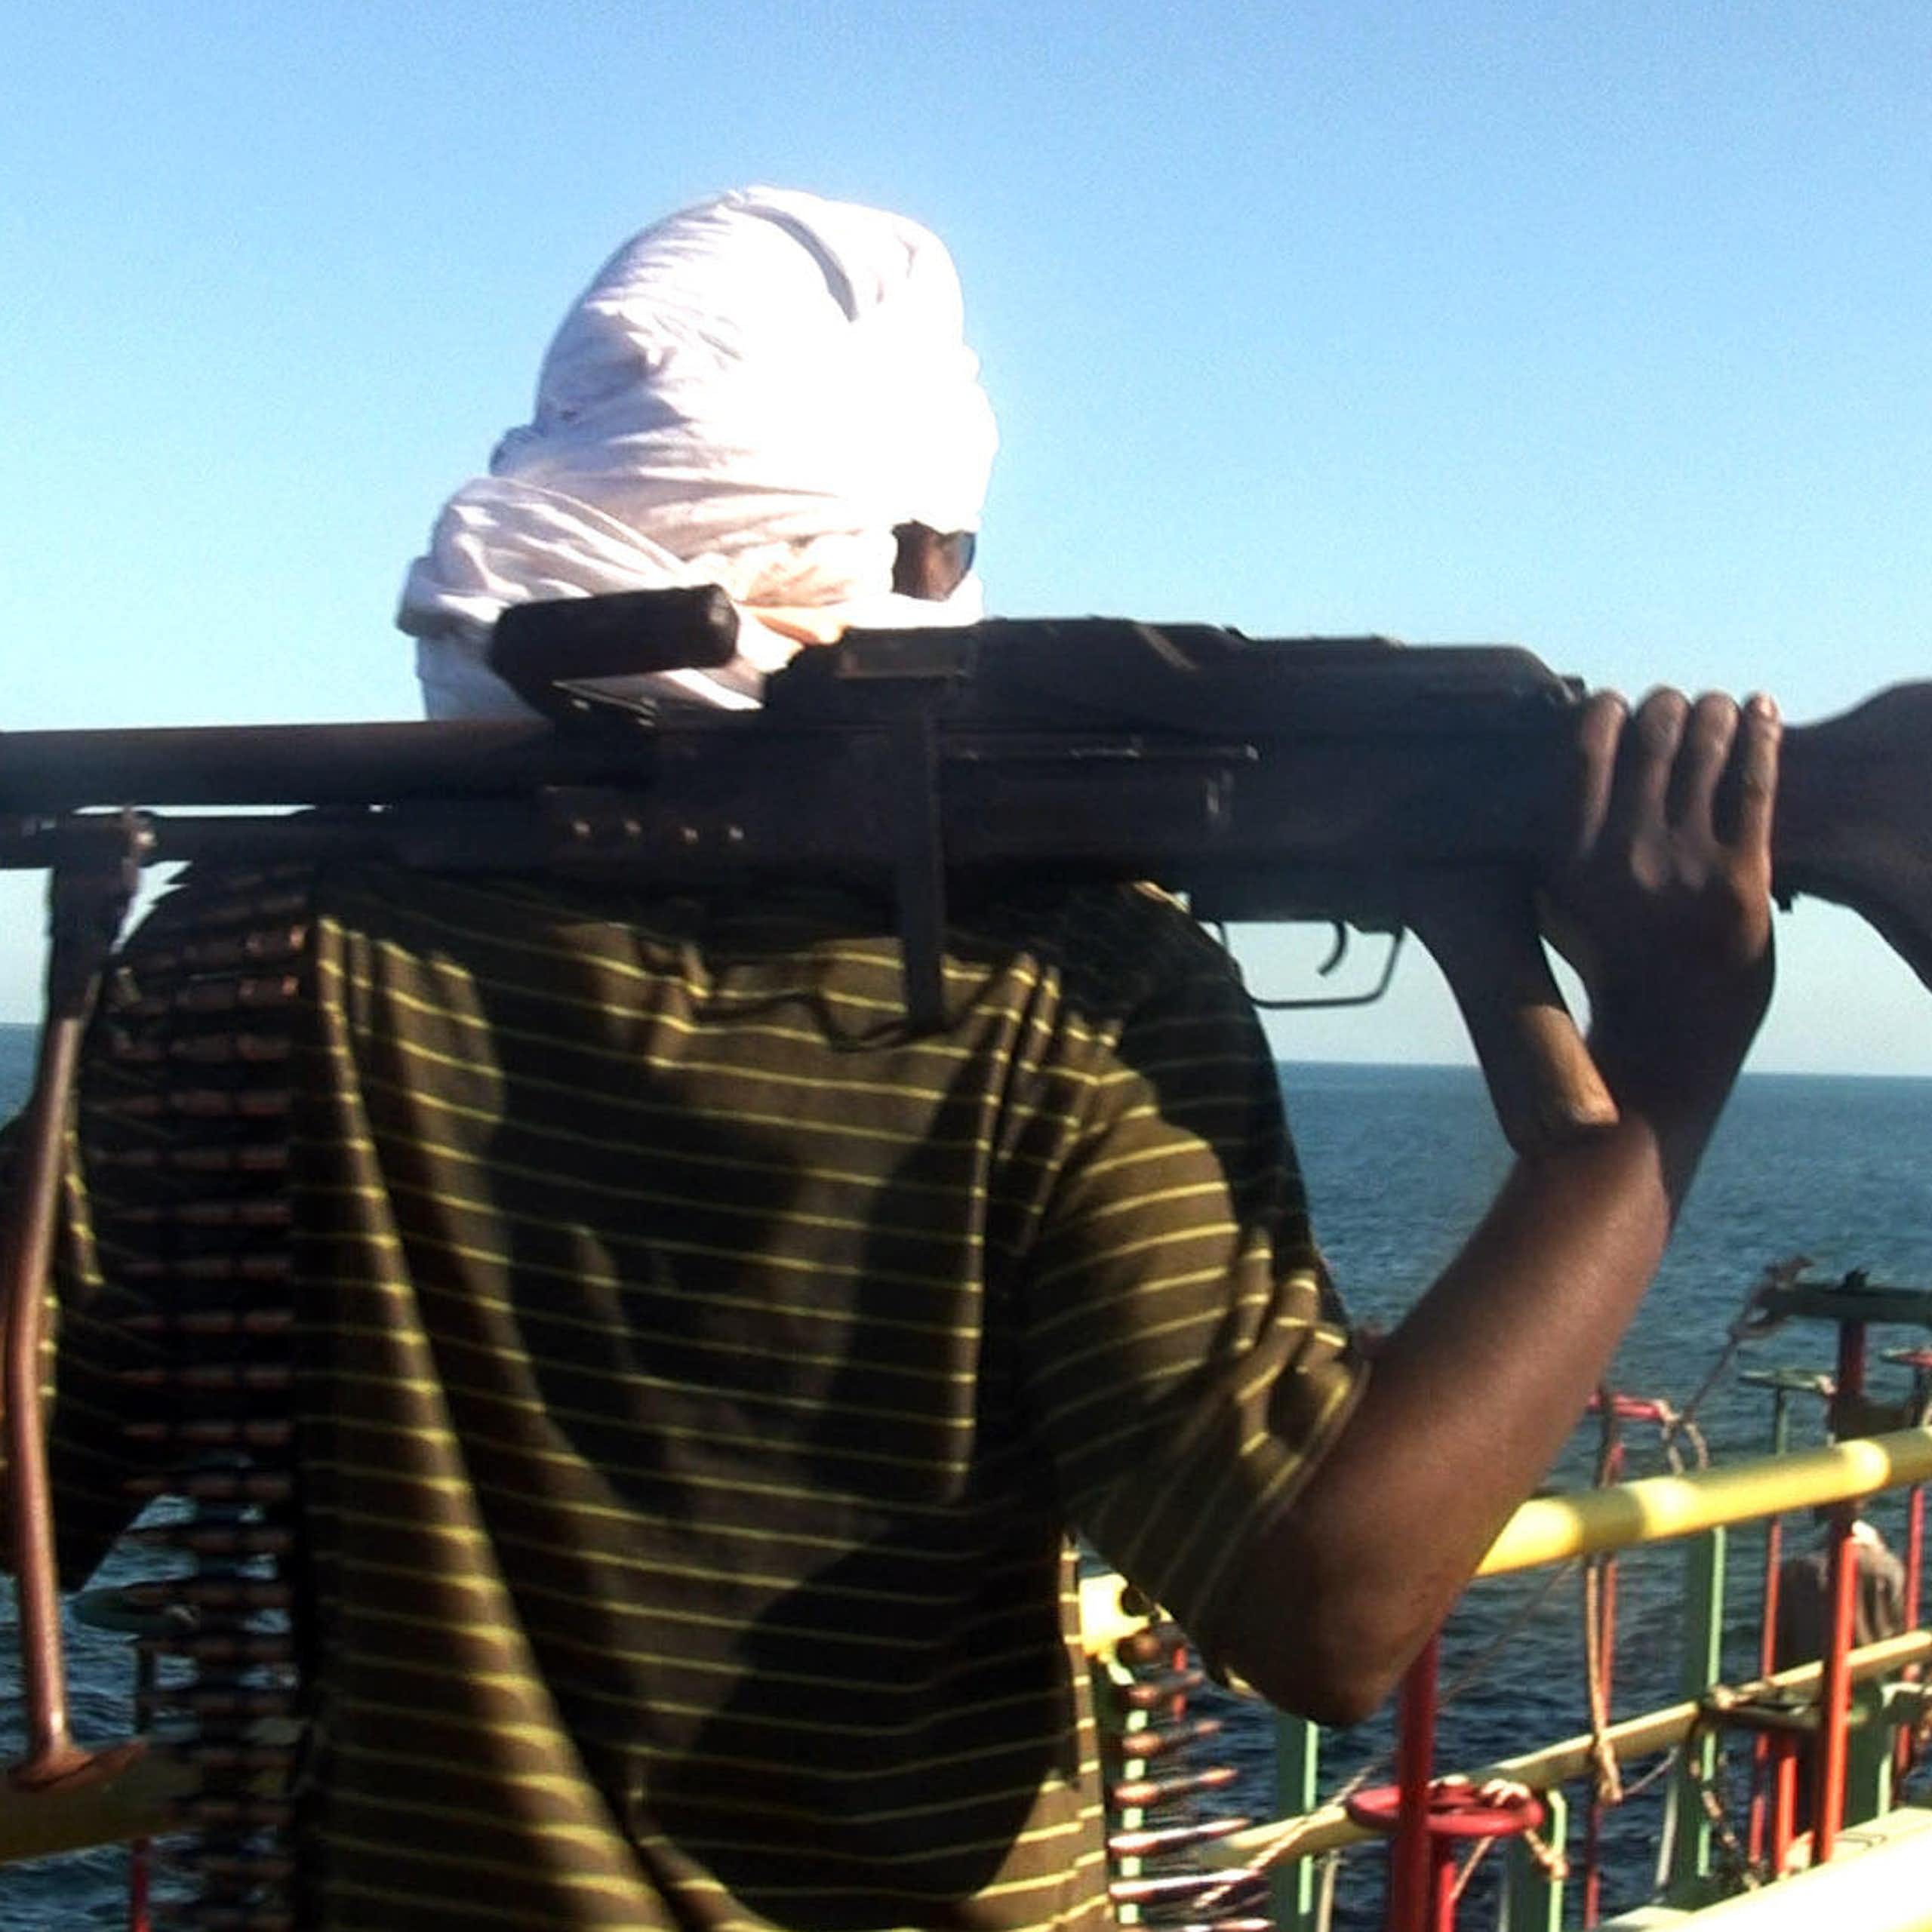 Climate change may be fuelling a resurgence of piracy across Africa